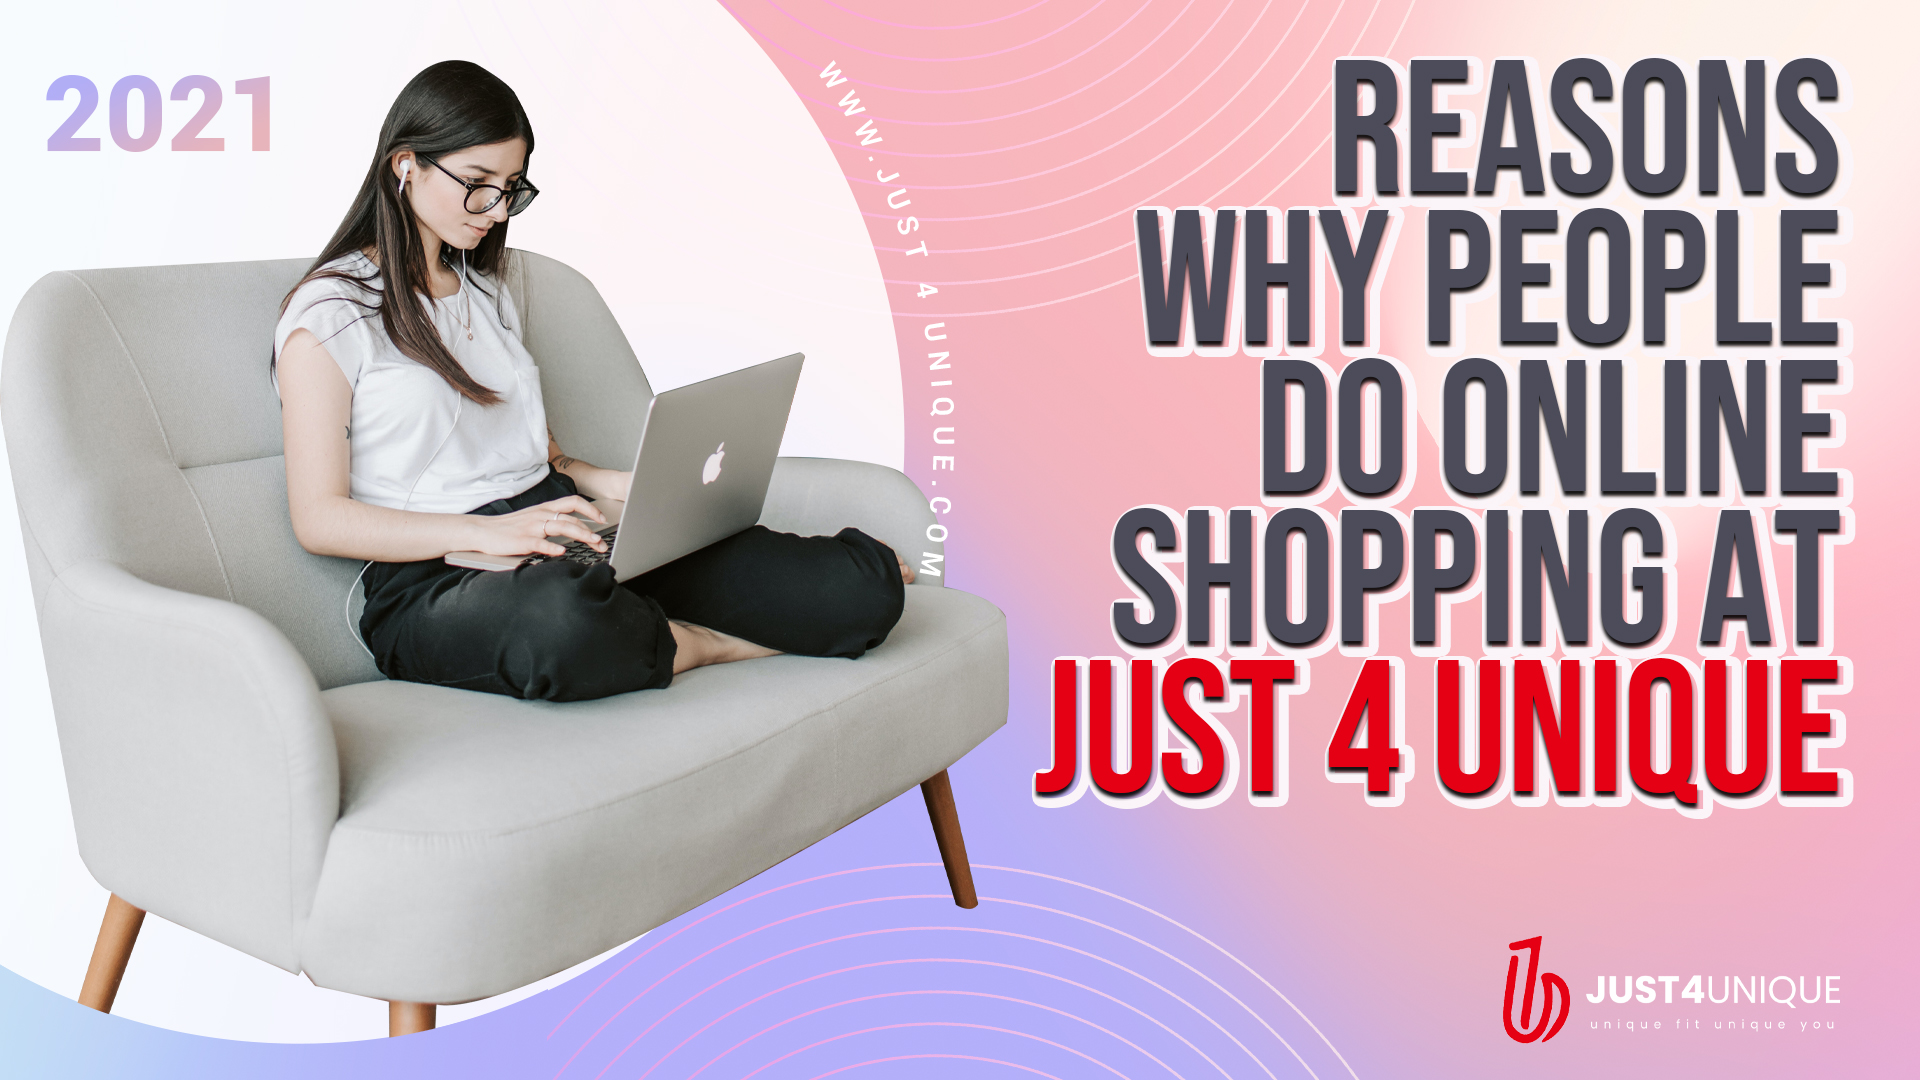 Reasons Why People Do Online Shopping at Just4unique